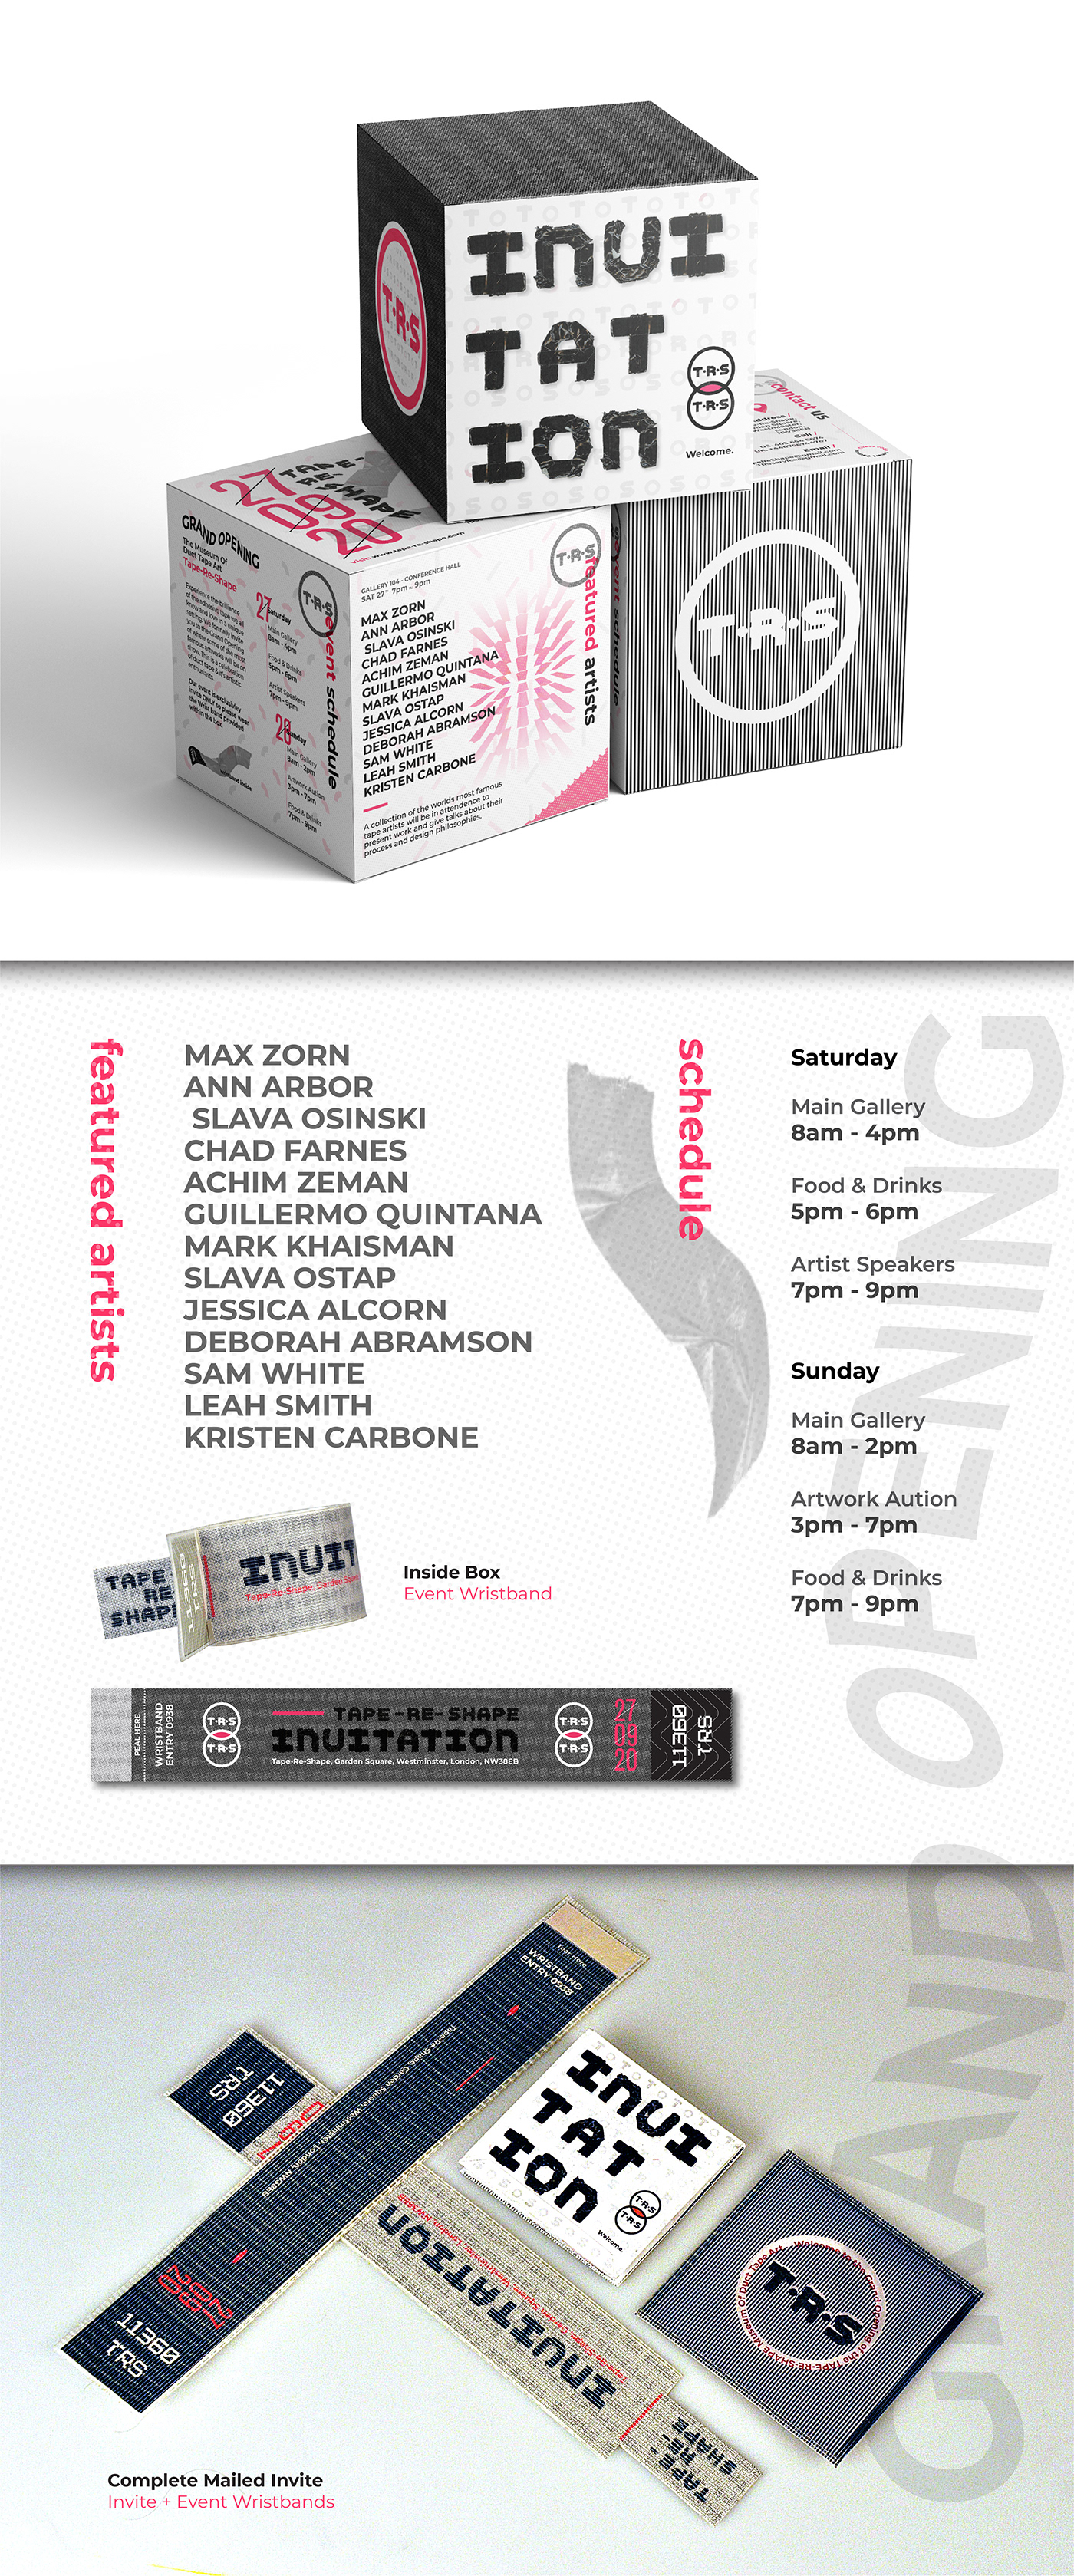 Event branding  interaction graphicdesign identity type adobeawards Packaging interactiondesign ducttape